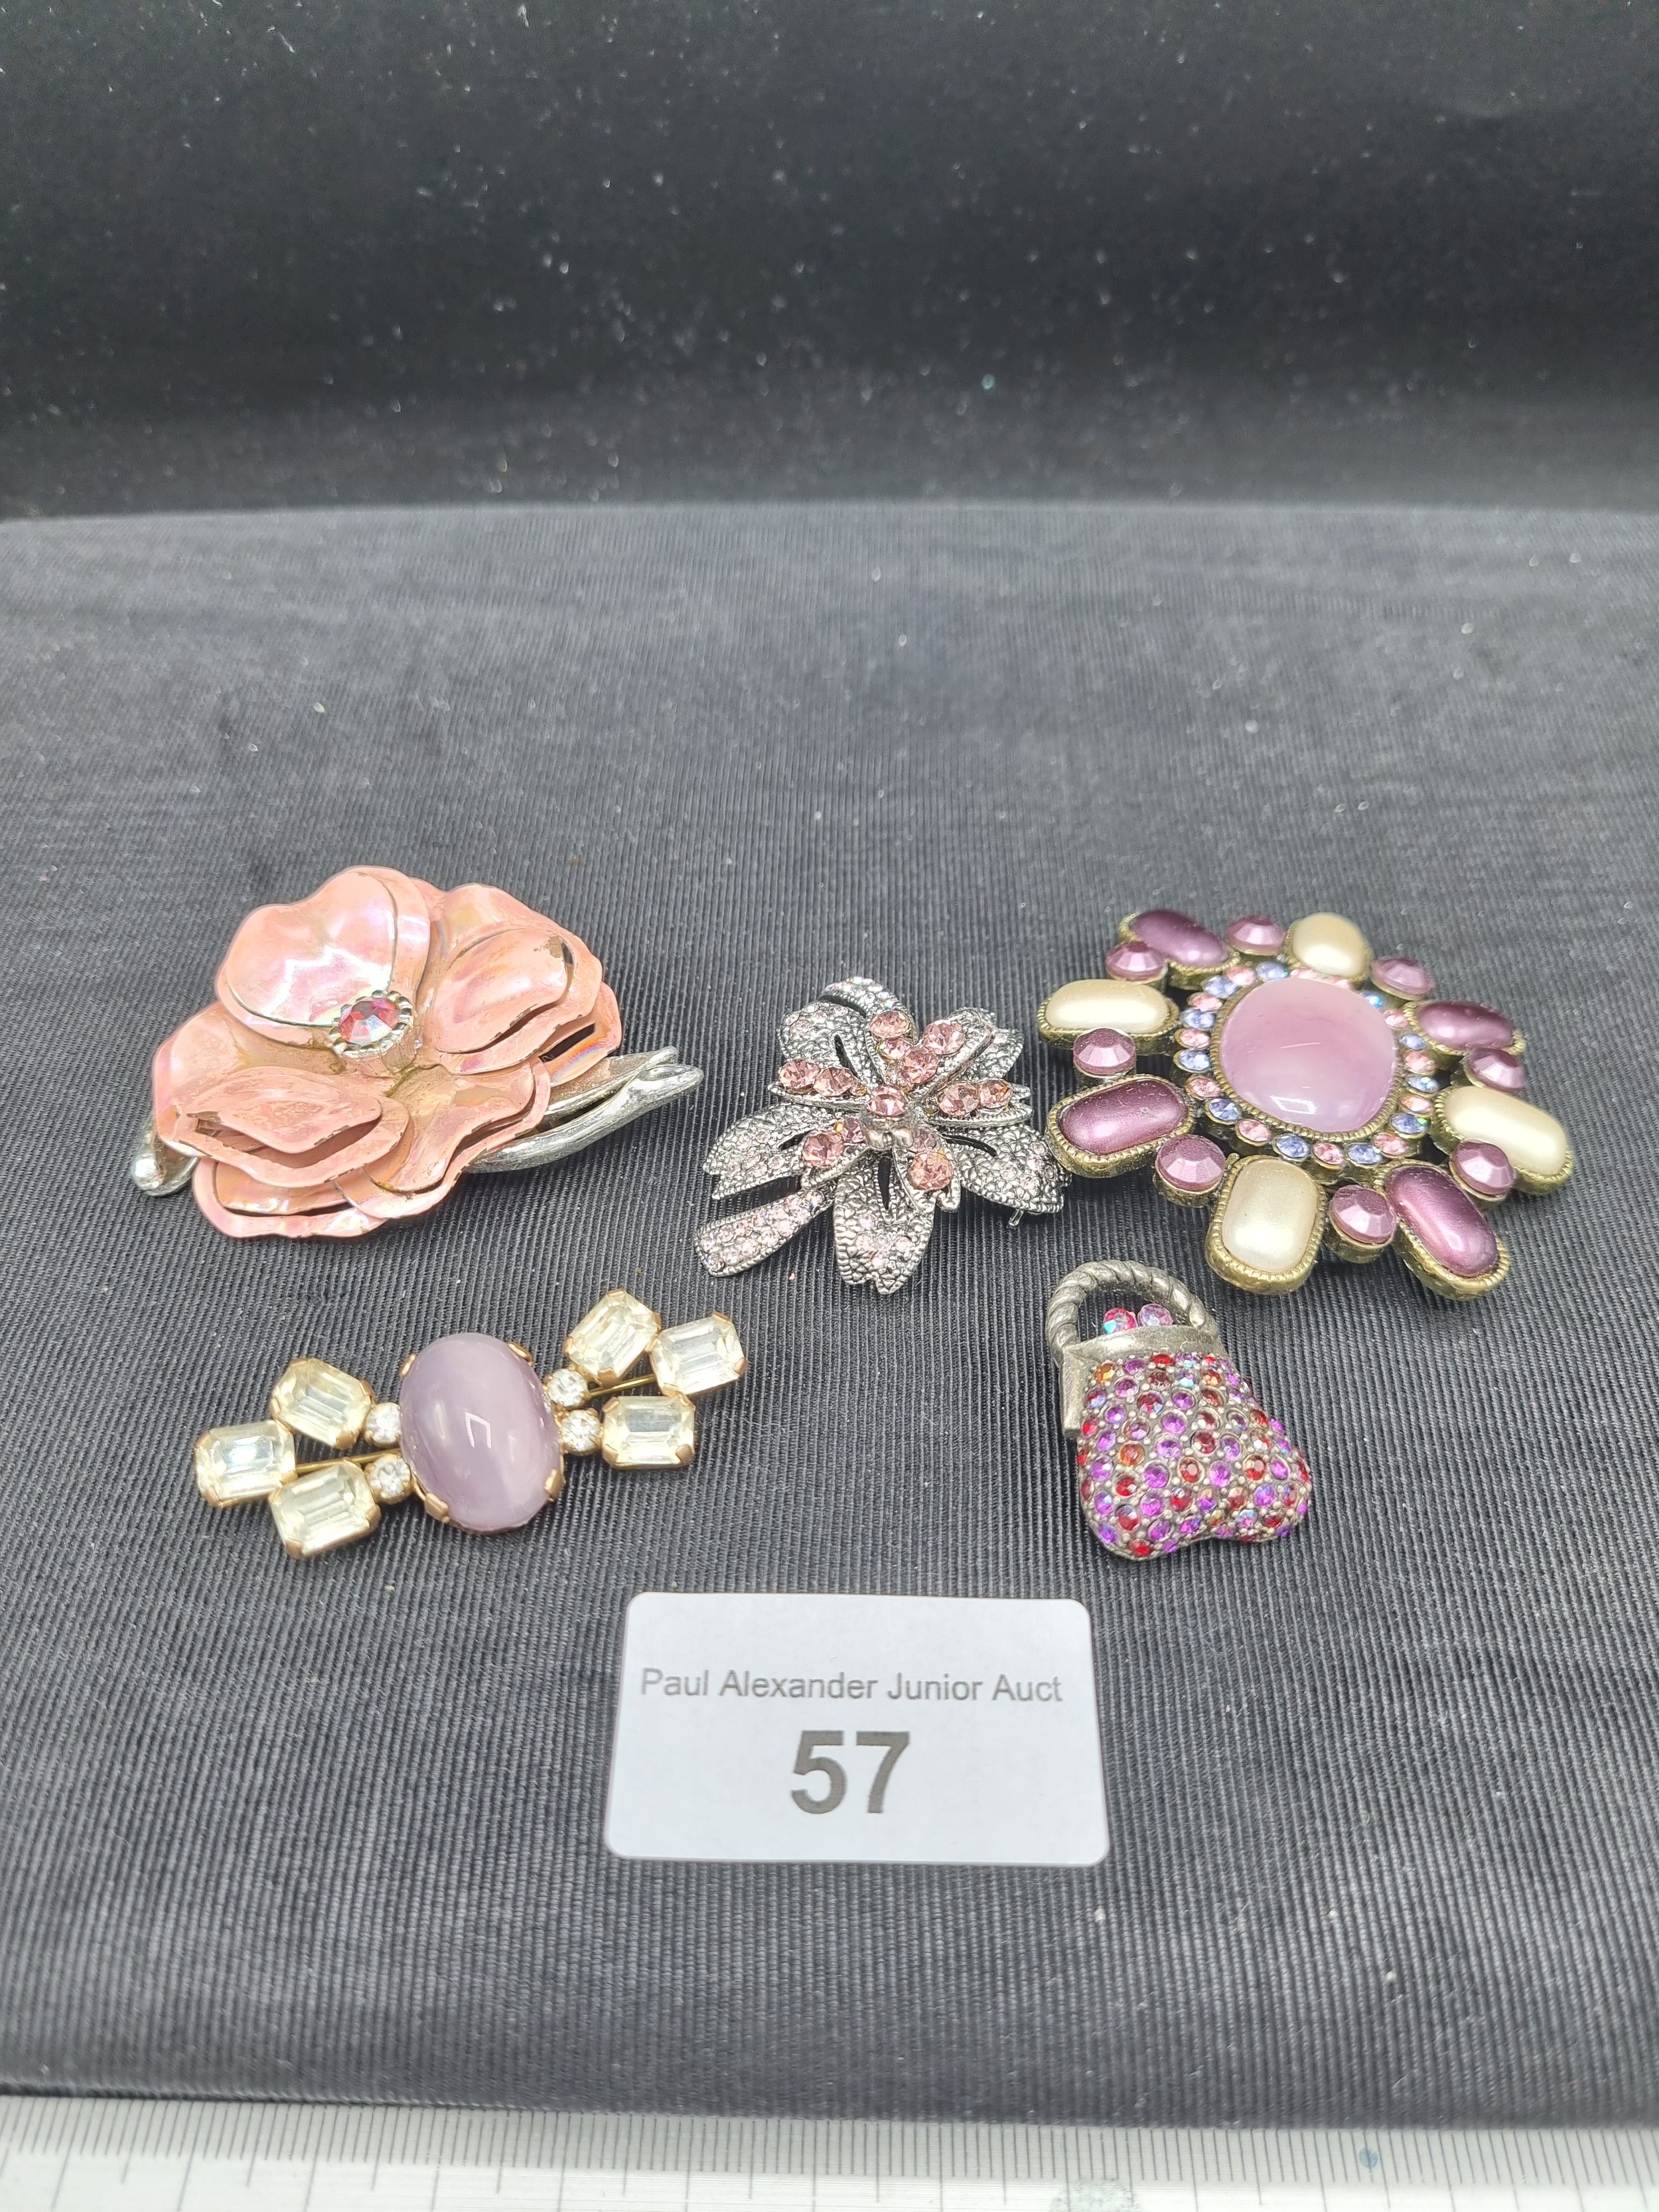 Lot of 5 different design pink vintage brooches. - Image 2 of 2